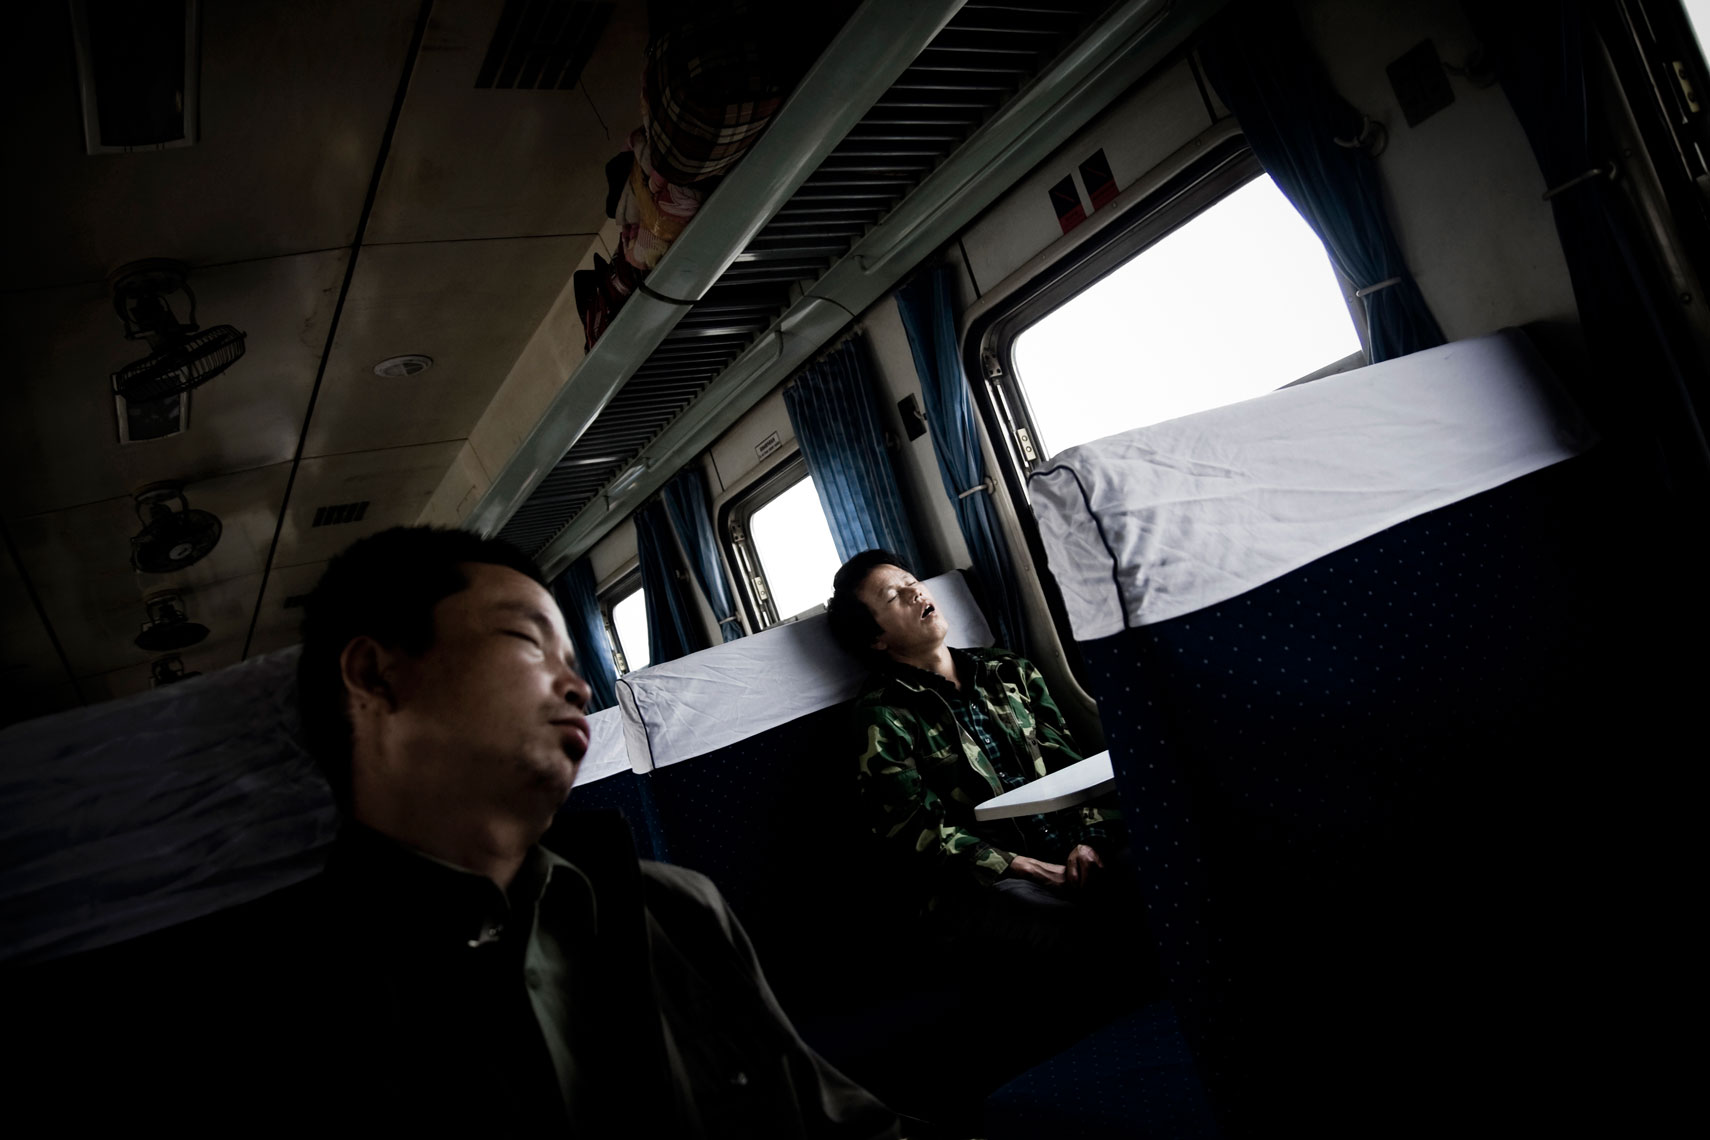 CHINA. Shanxi Province, September 2012. Passengers sleeping on the train that connects the cities of Datong and Ping Yao.